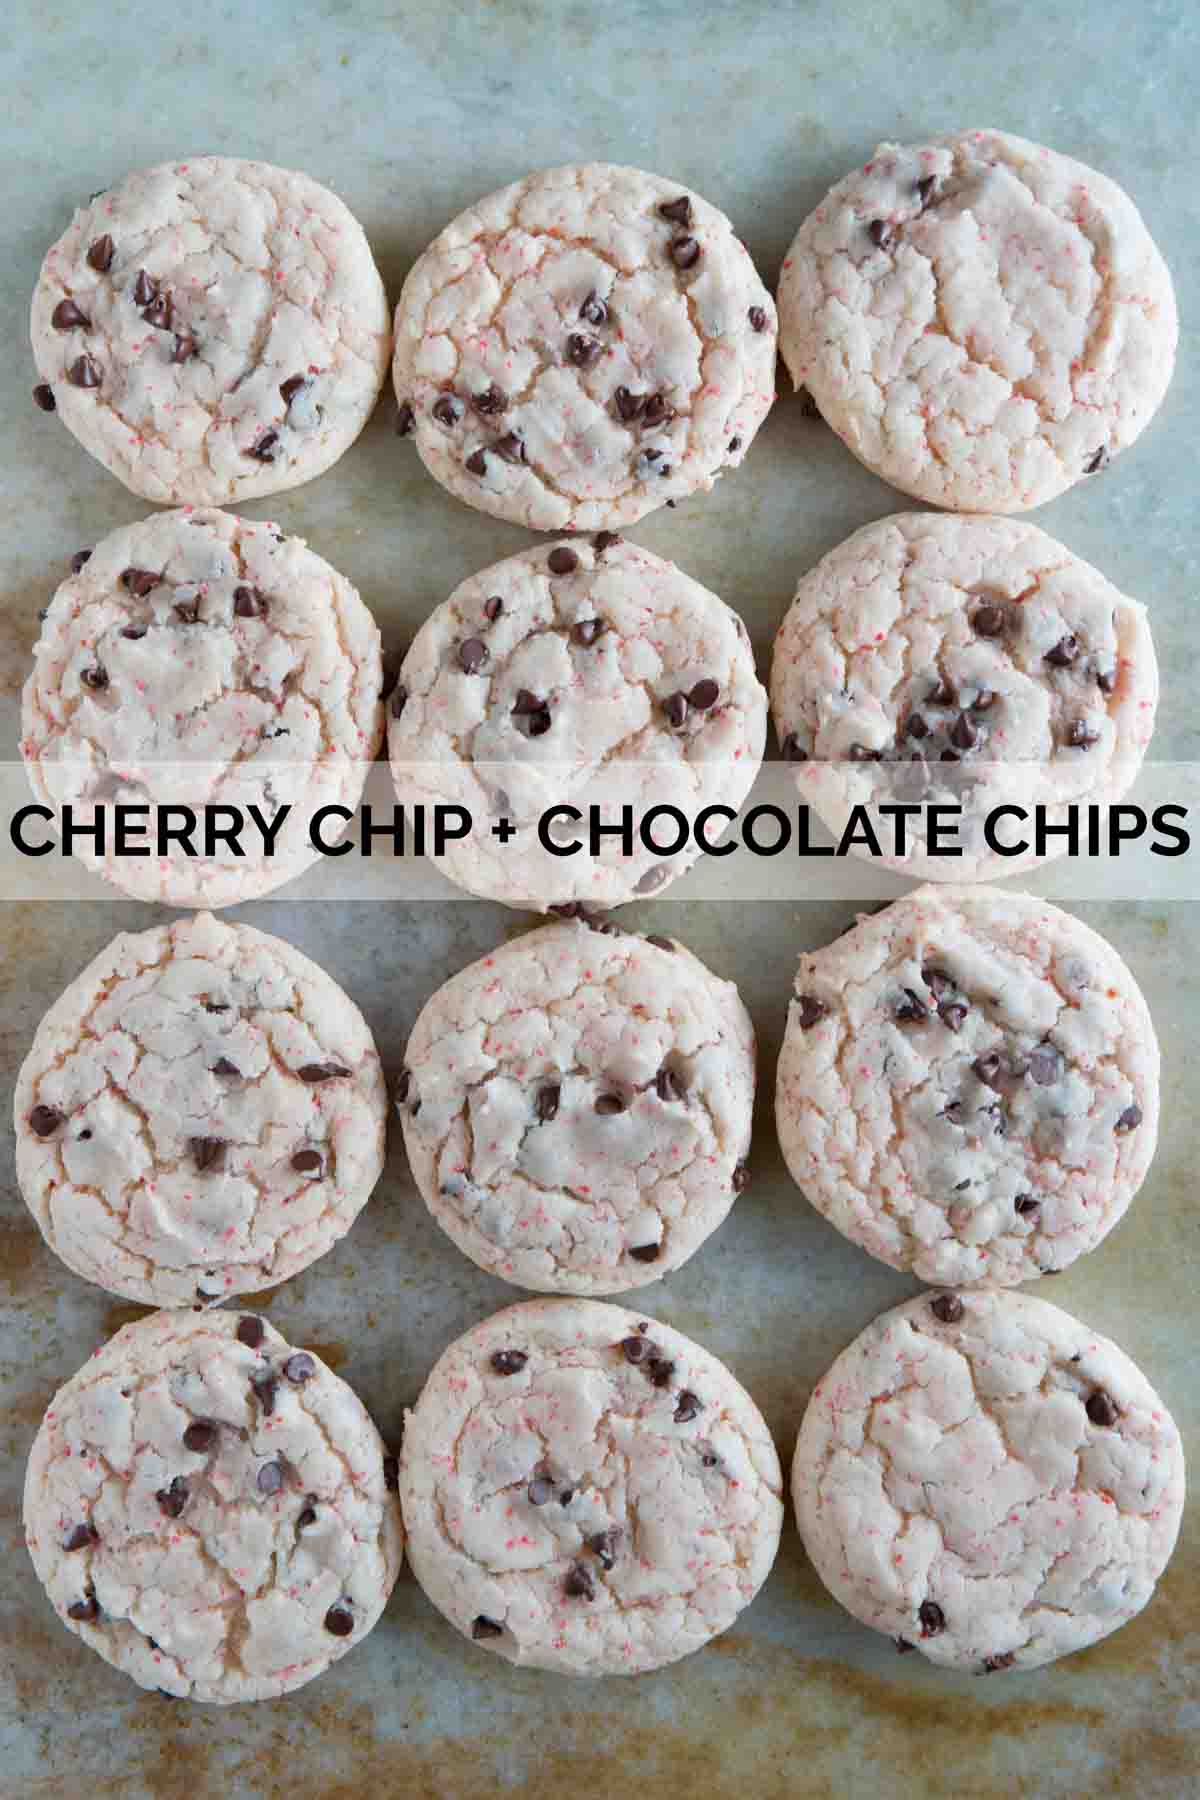 Cake mix cookies made from cherry chip cake mix and chocolate chips